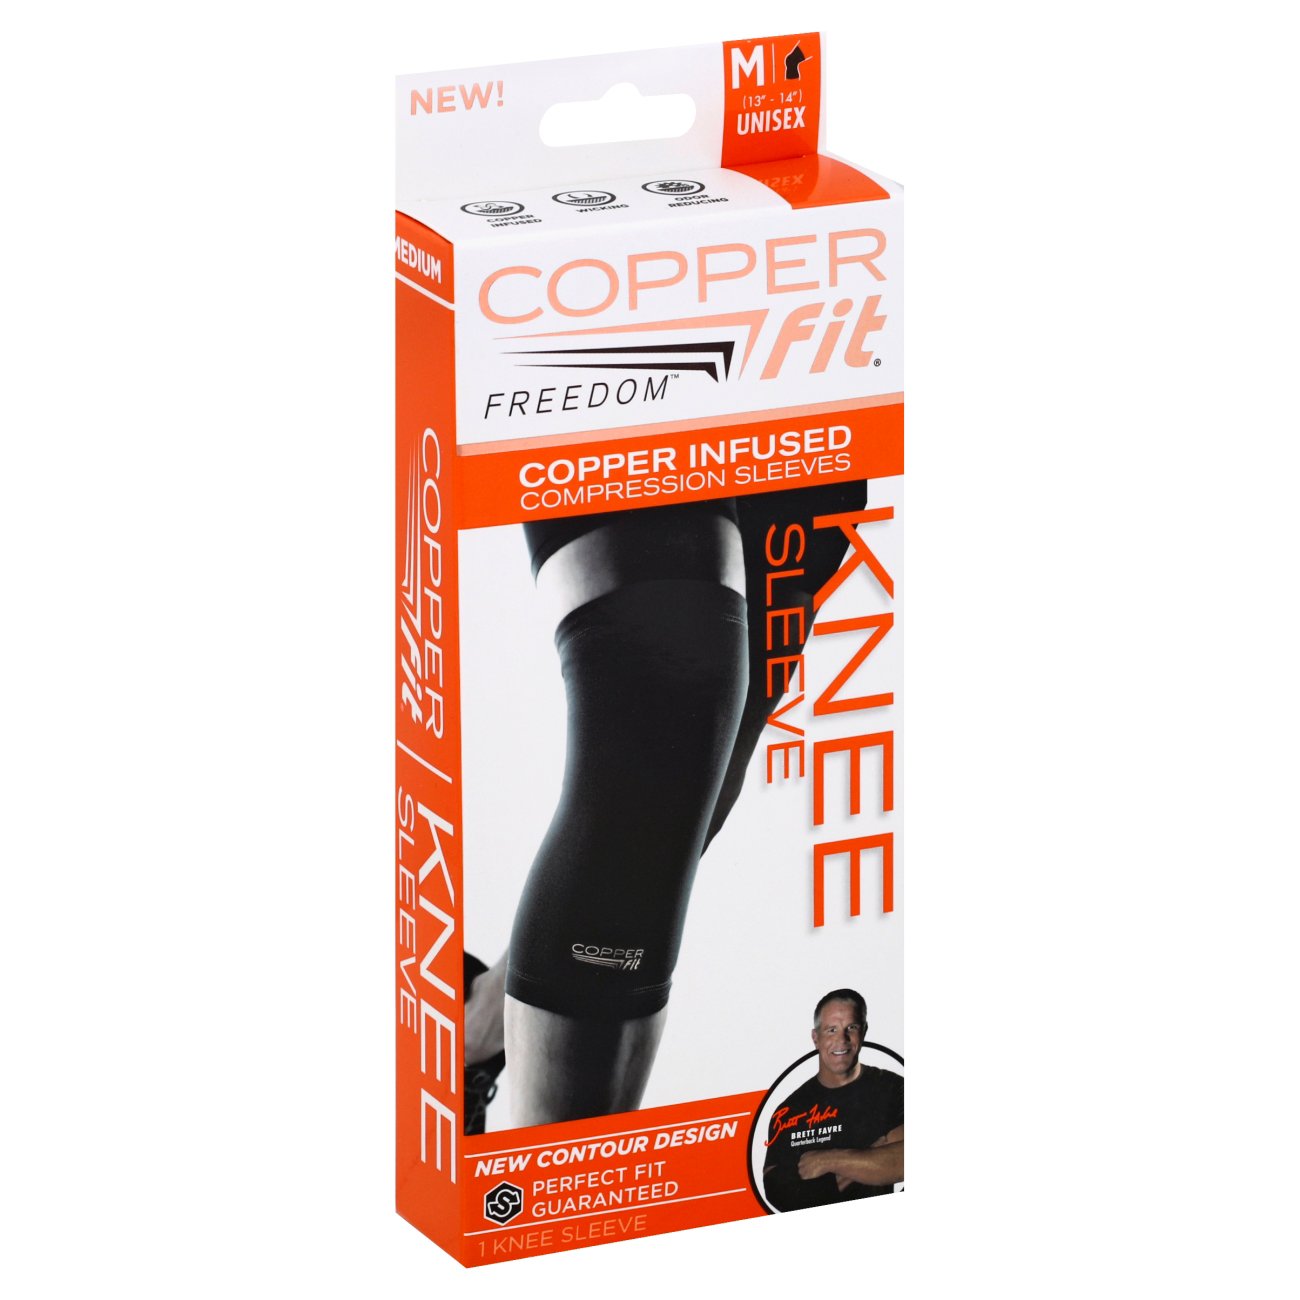 can you wash copper fit sleeves